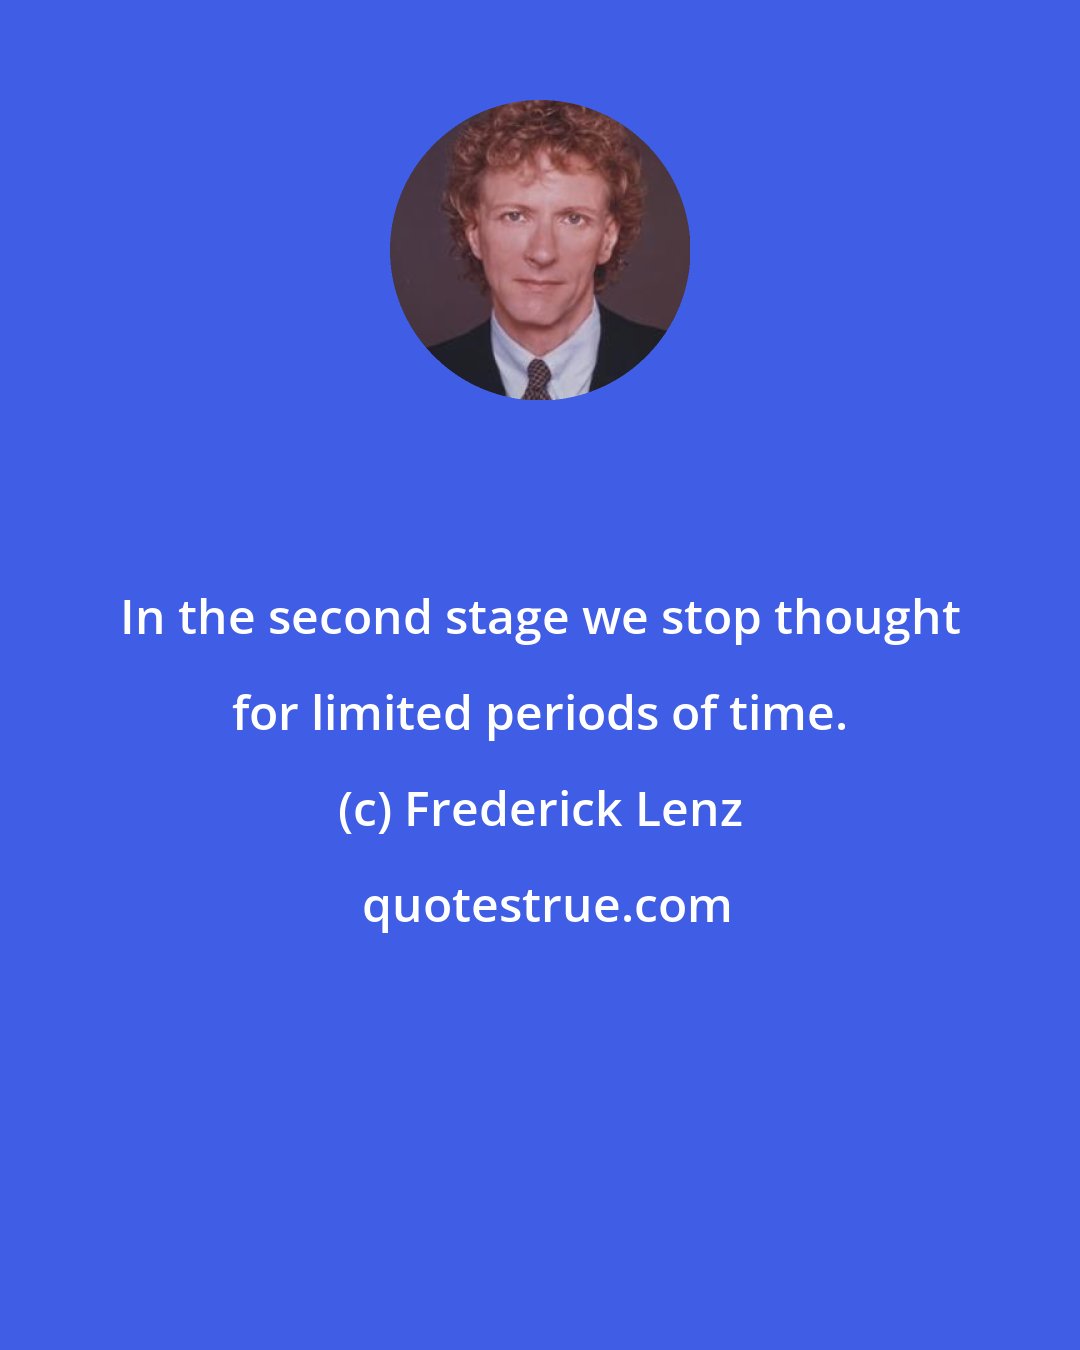 Frederick Lenz: In the second stage we stop thought for limited periods of time.